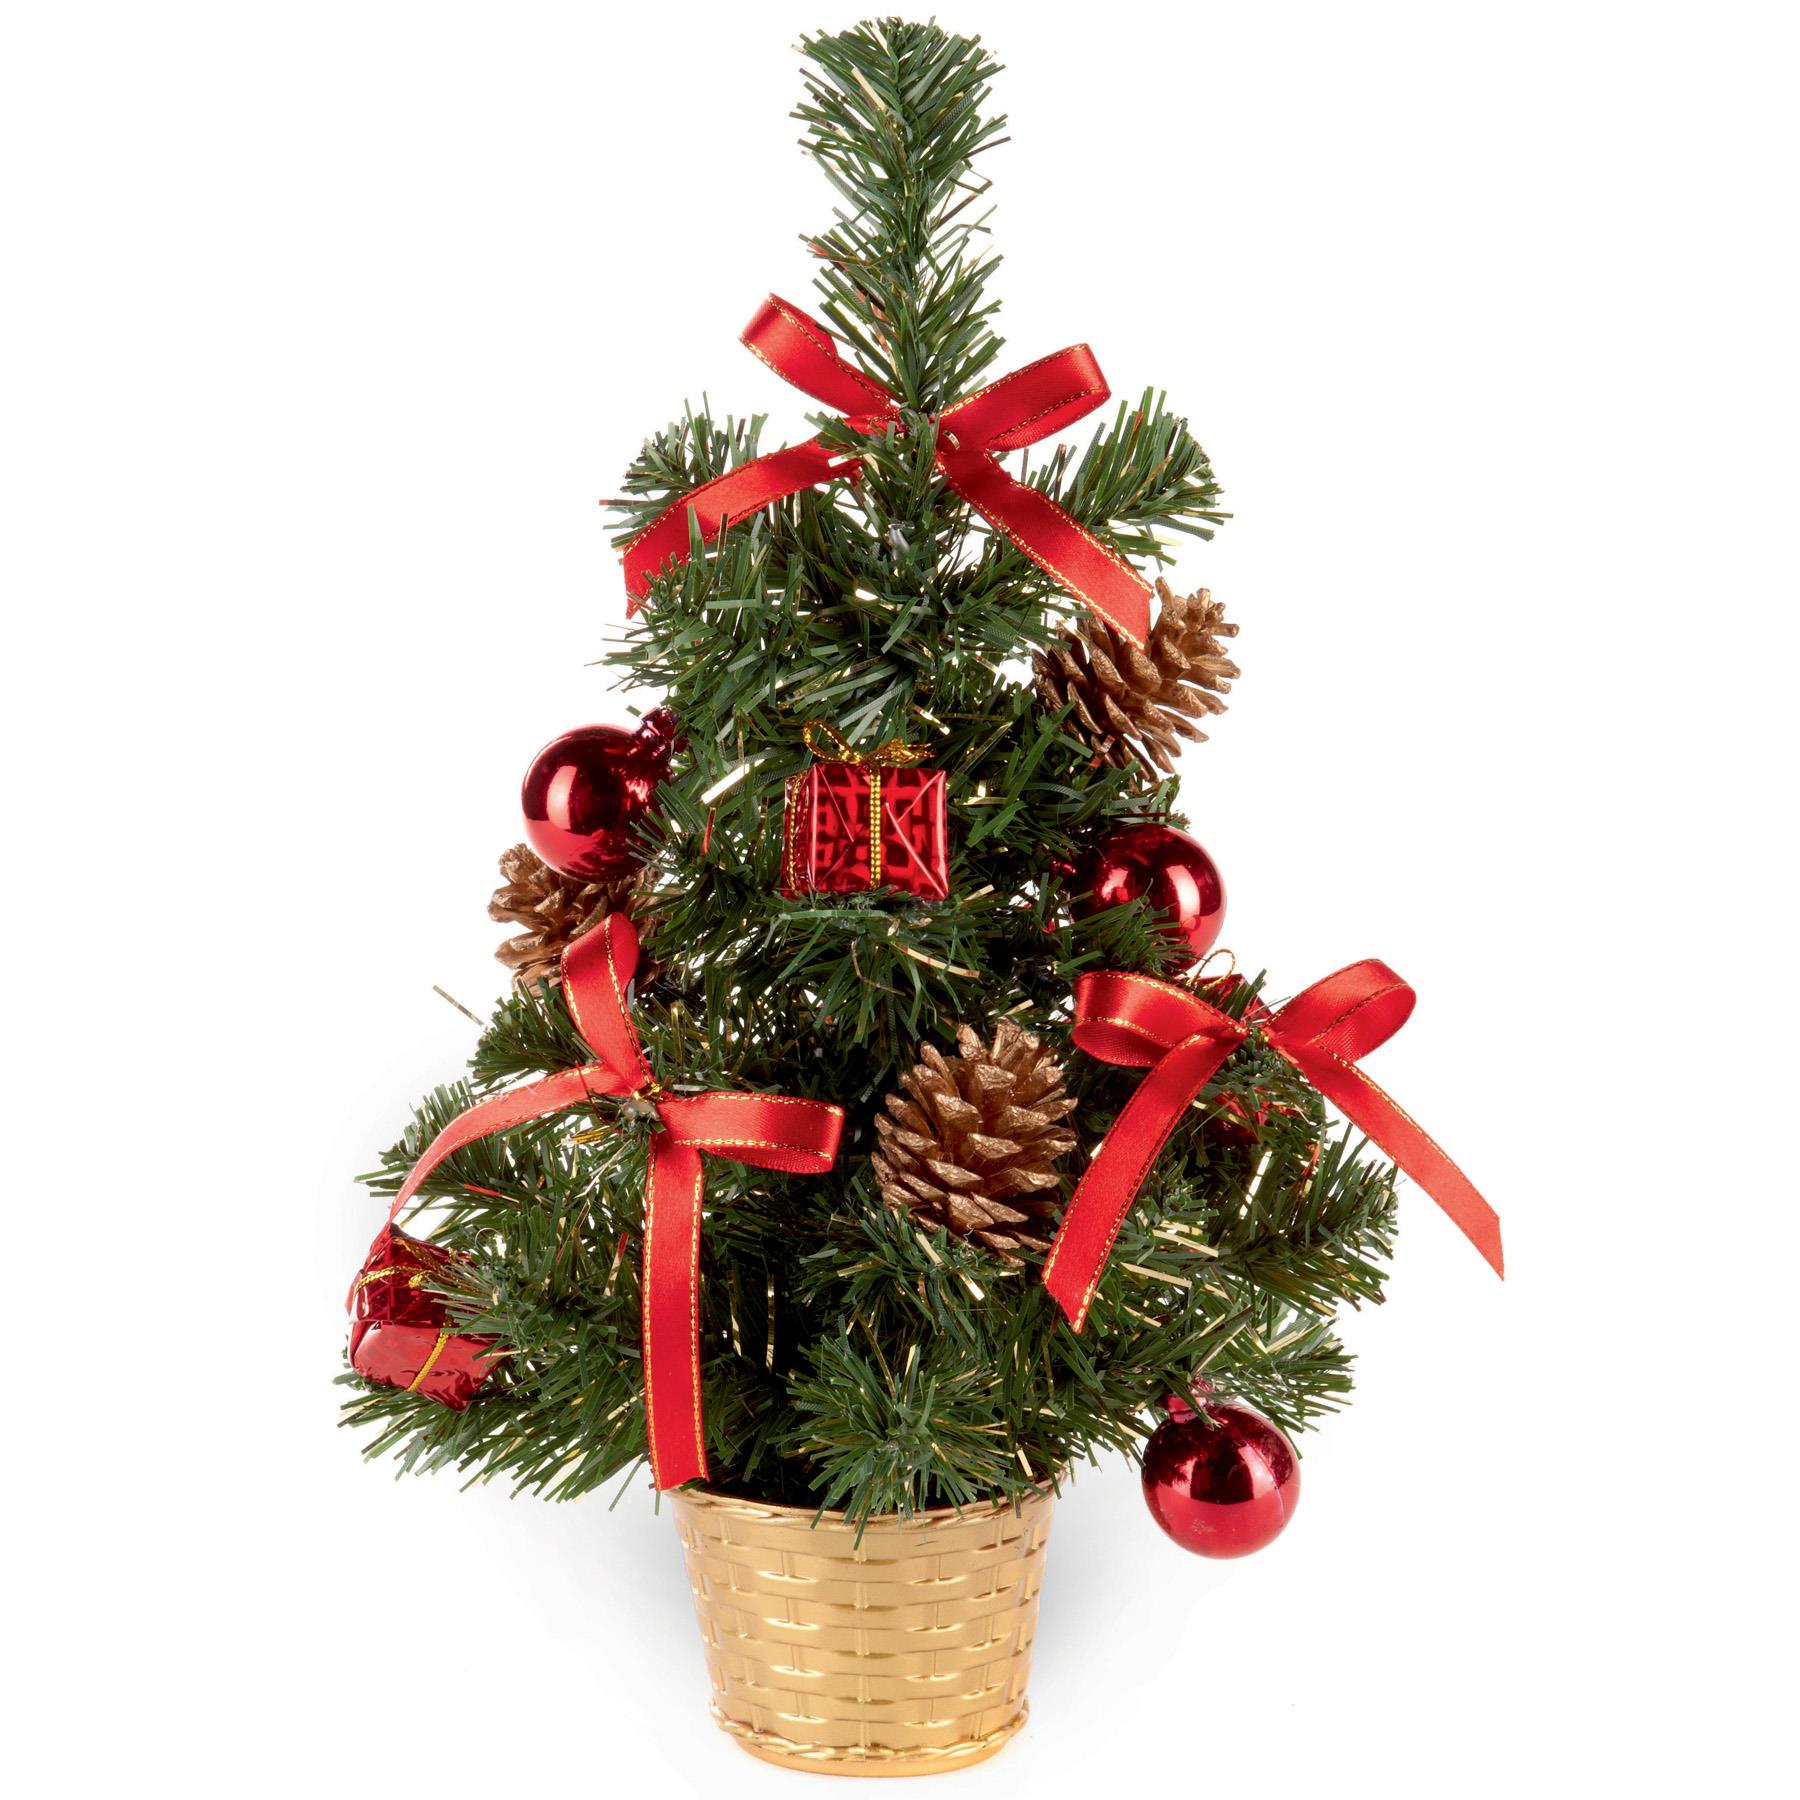 30cm Artificial Christmas Tree with Gold Tinsel Flecks, Red Decorations and Pine Cones